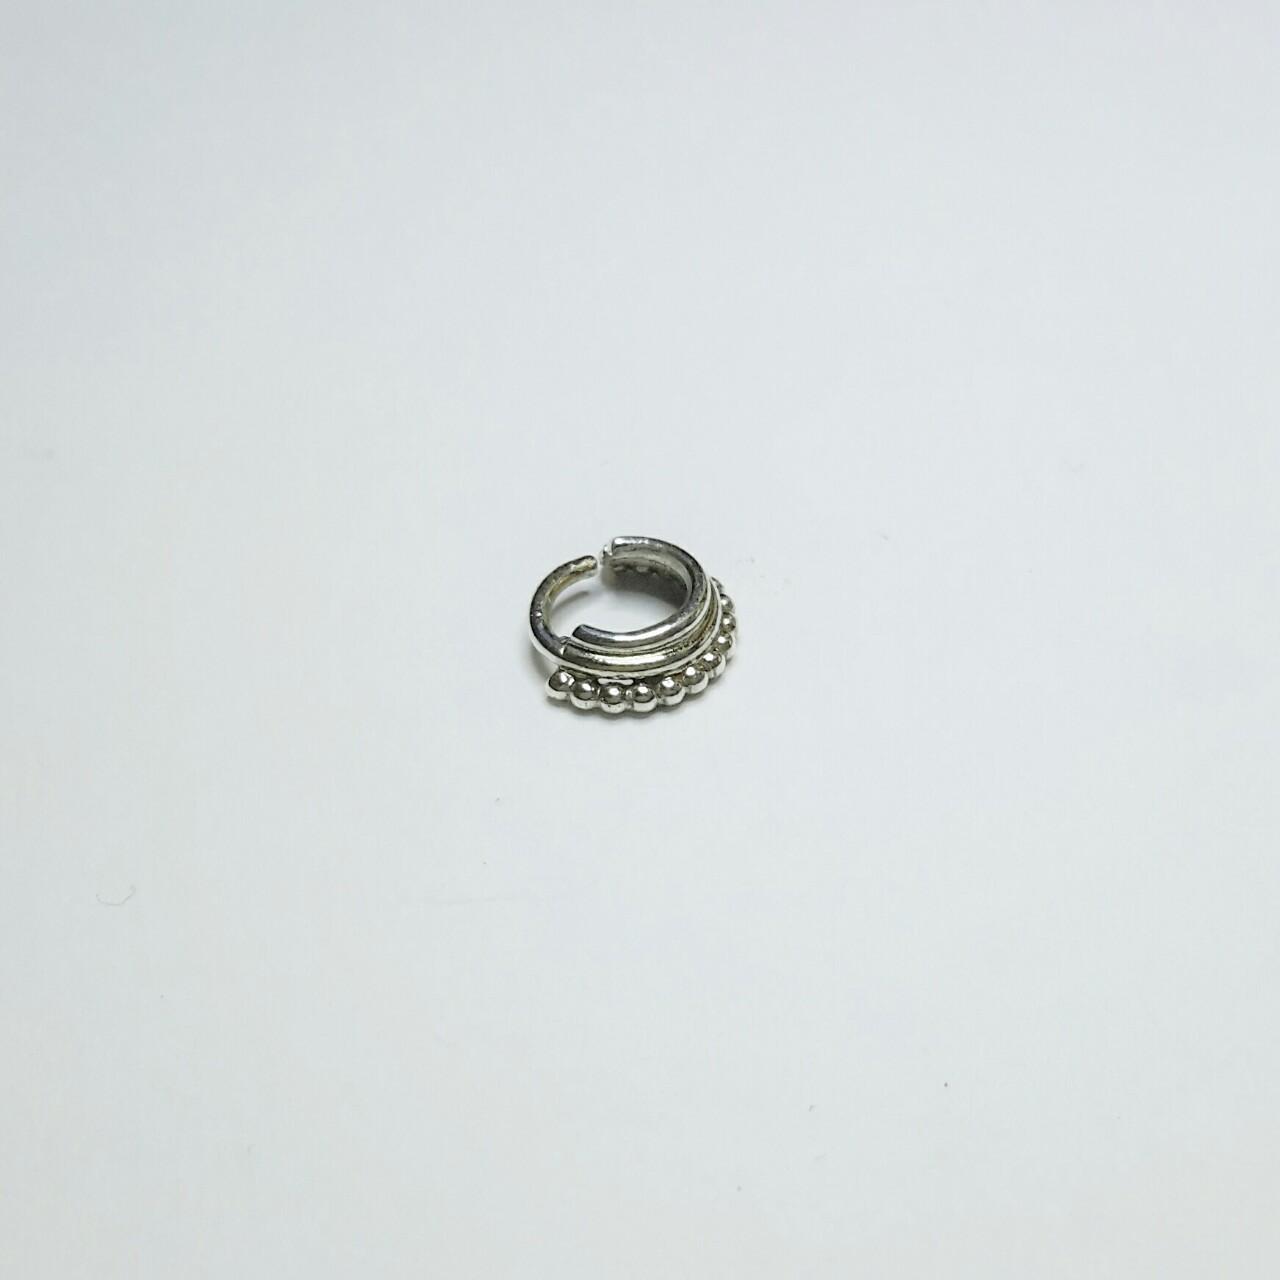 Product Image 3 - Stacked Septum Ring

Layers of polished